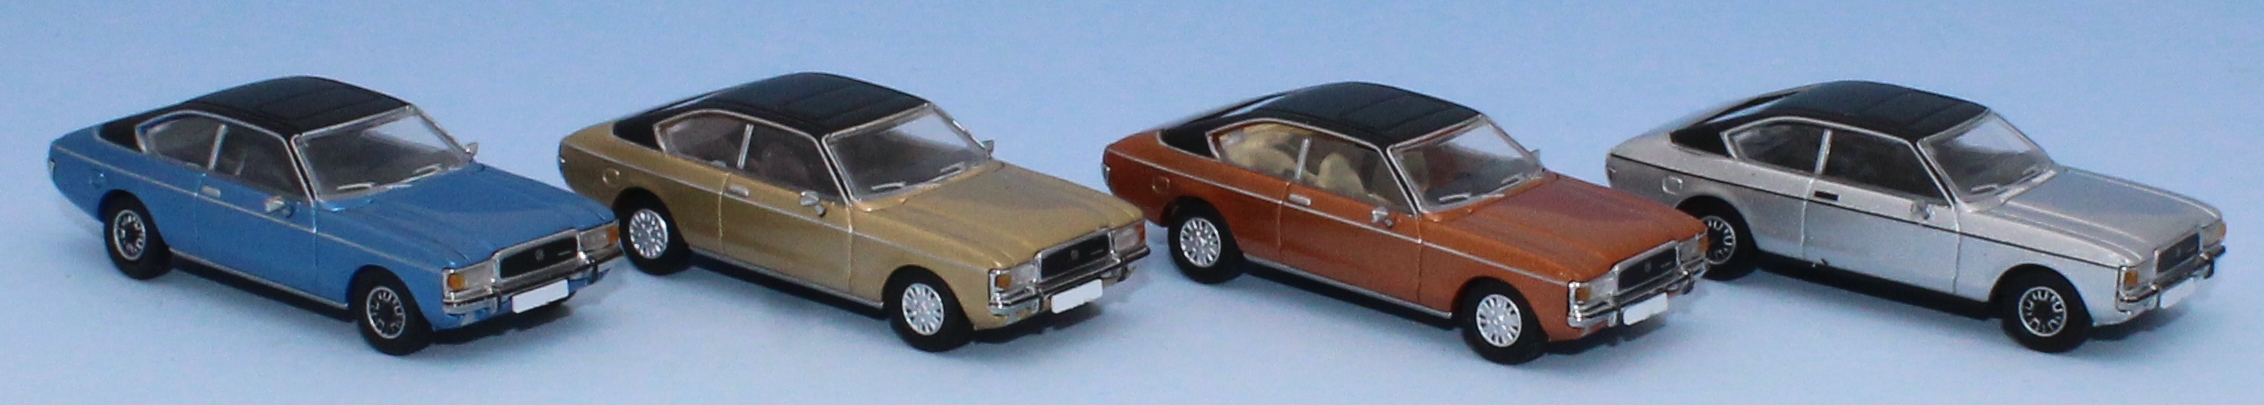 Ford Granada coupé phase 1 (1972 - 1977)